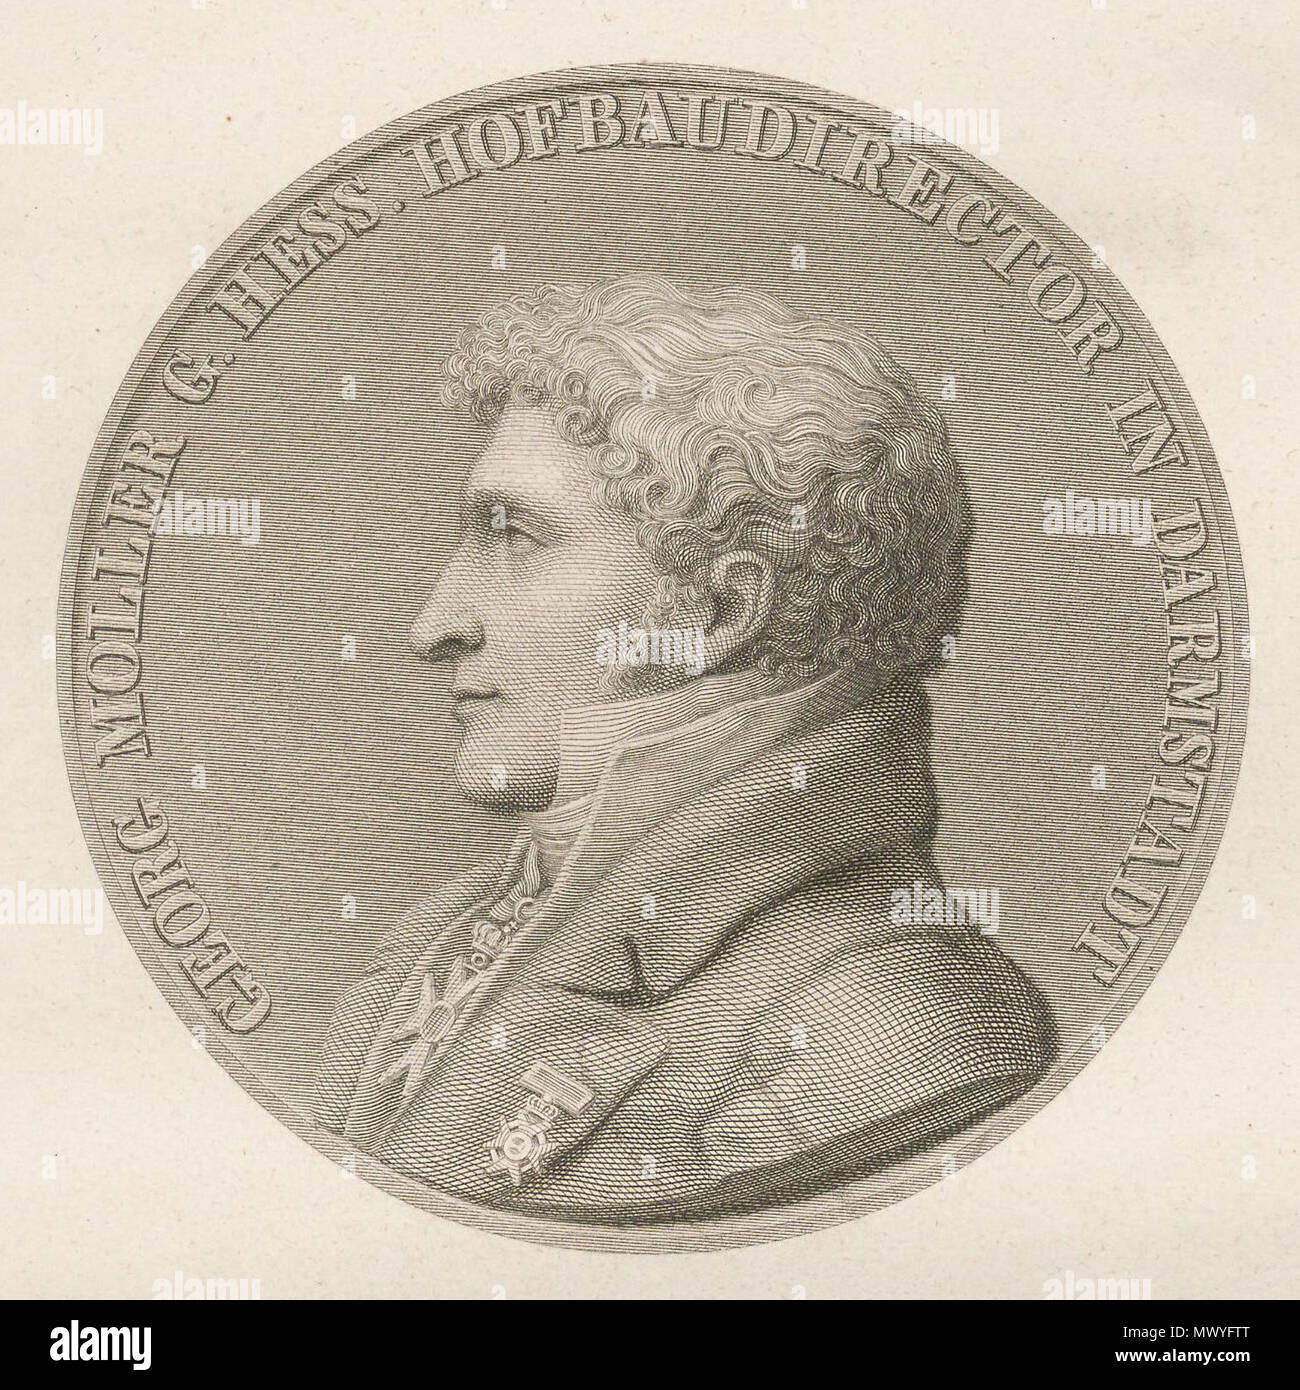 . English: Georg Moller (born January 21, 1784 in Diepholz; died March 13, 1852 in Darmstadt) was a German architect and town planner. before 1852. Unknown 239 Georg Moller circular portrait Stock Photo